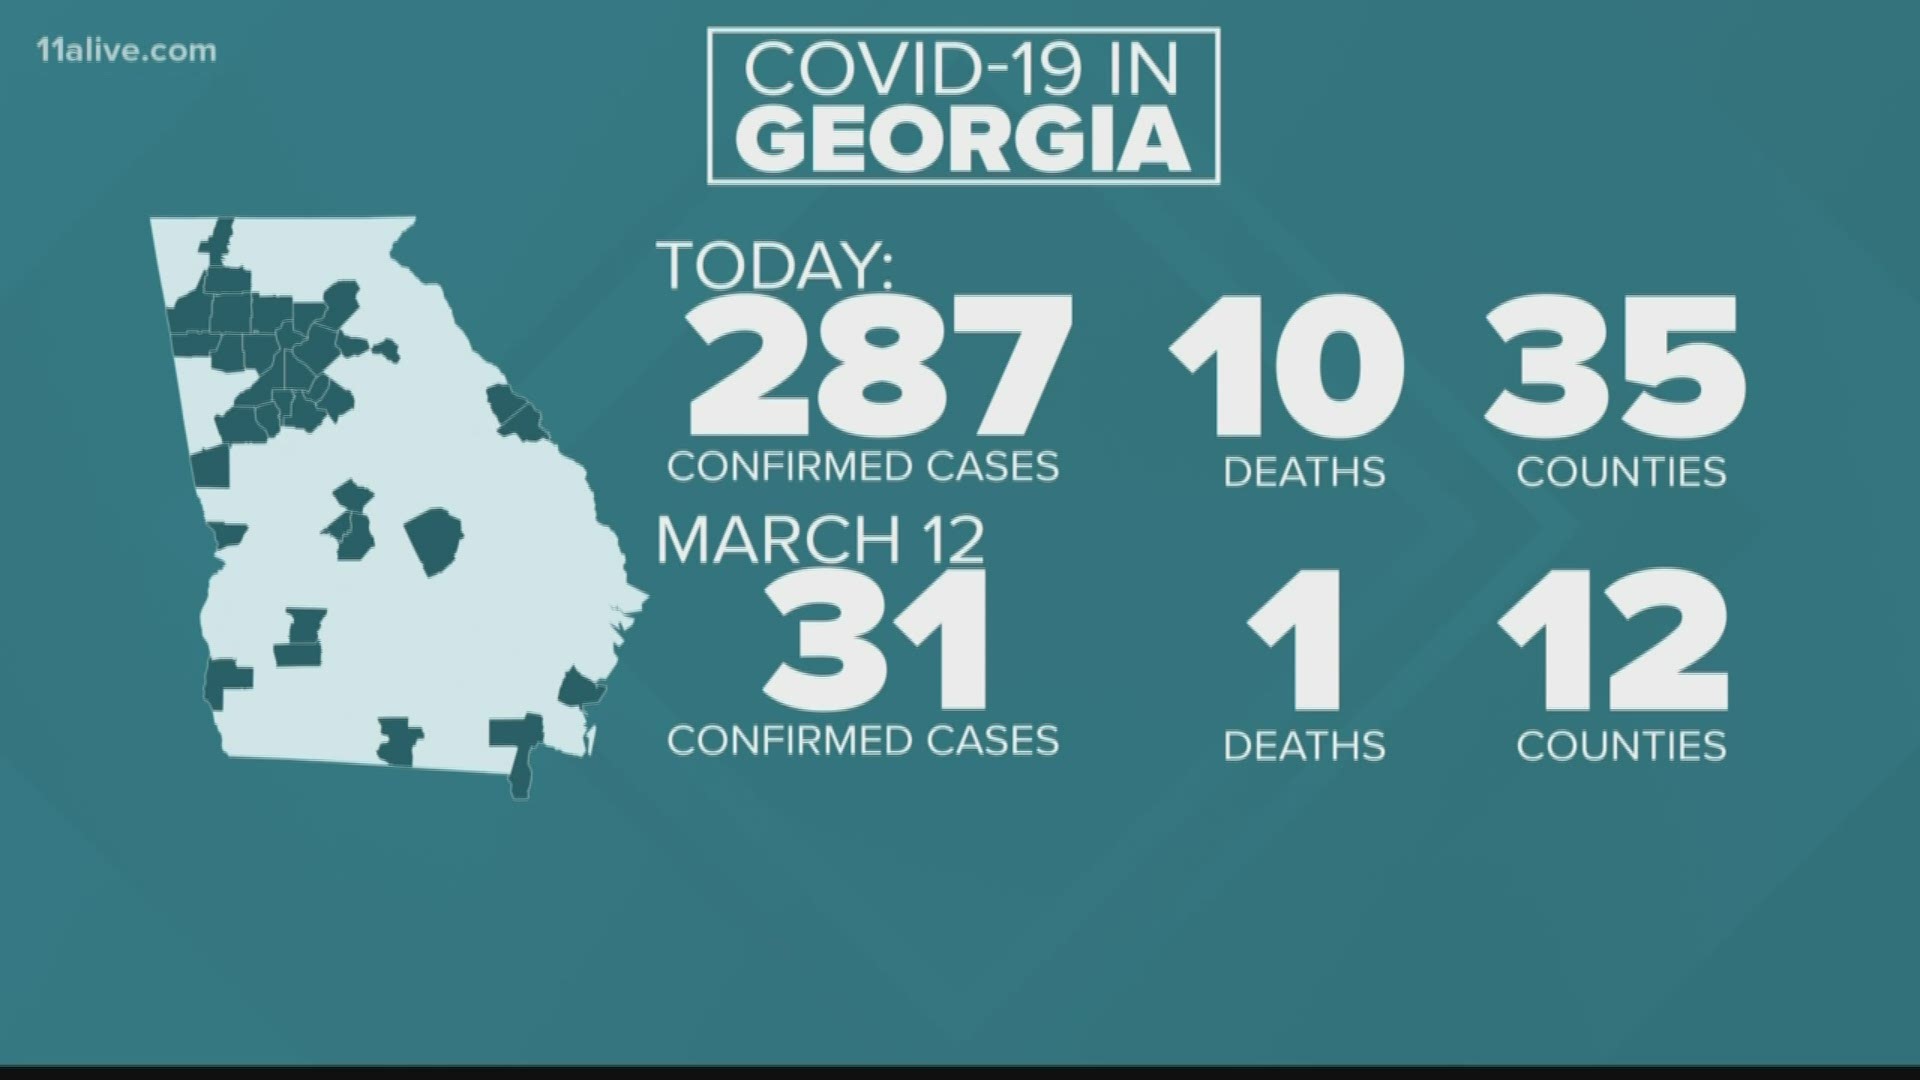 The latest info on the spread of coronavirus in Georgia and the United States.